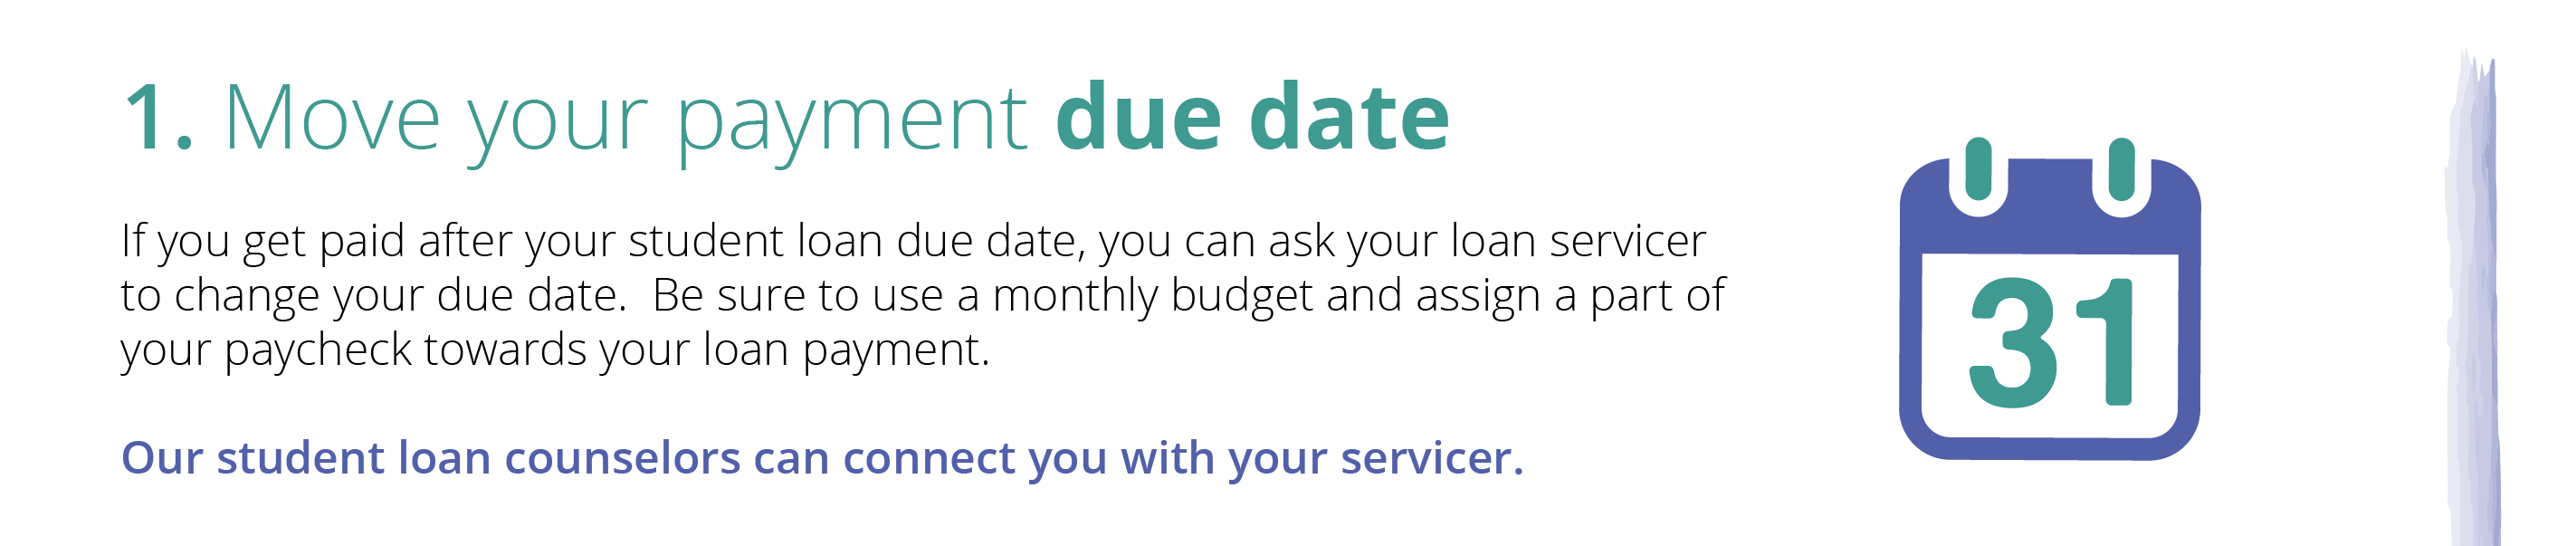 Student Loan Payments due date